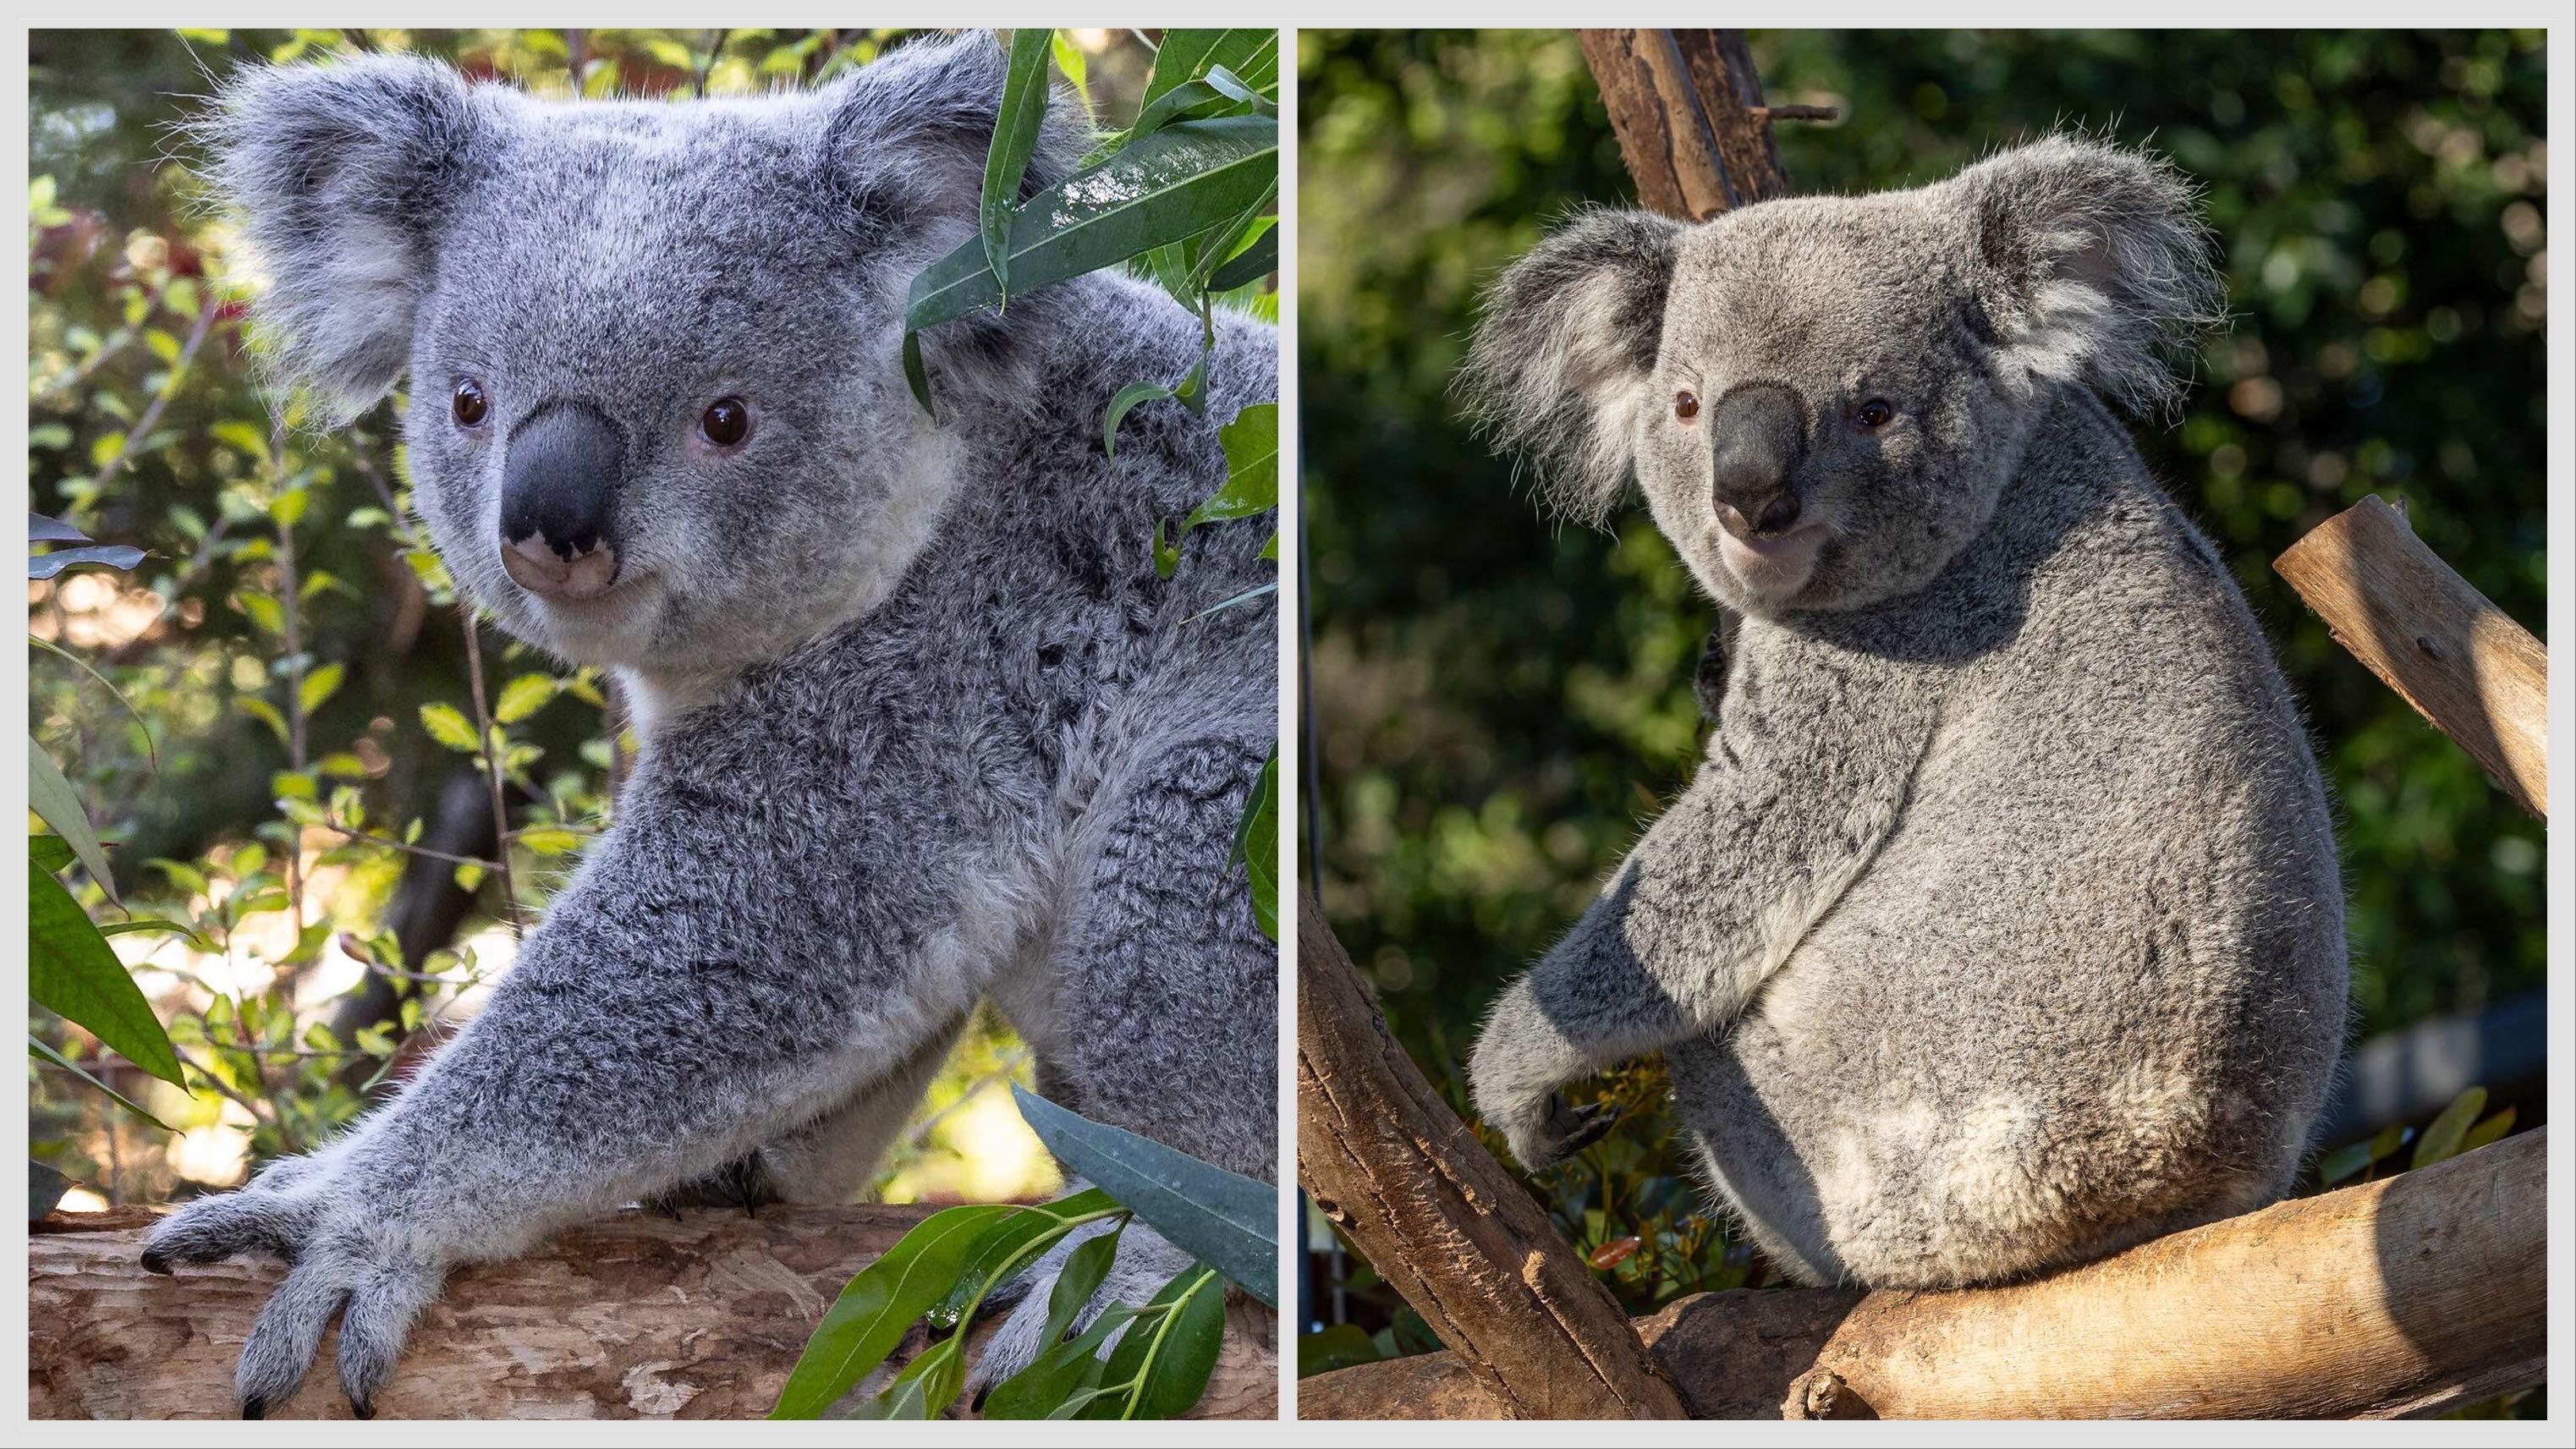 Brumby, left, and Willum, right, will be Brookfield Zoo’s first-ever koalas. (Courtesy of San Diego Zoo)